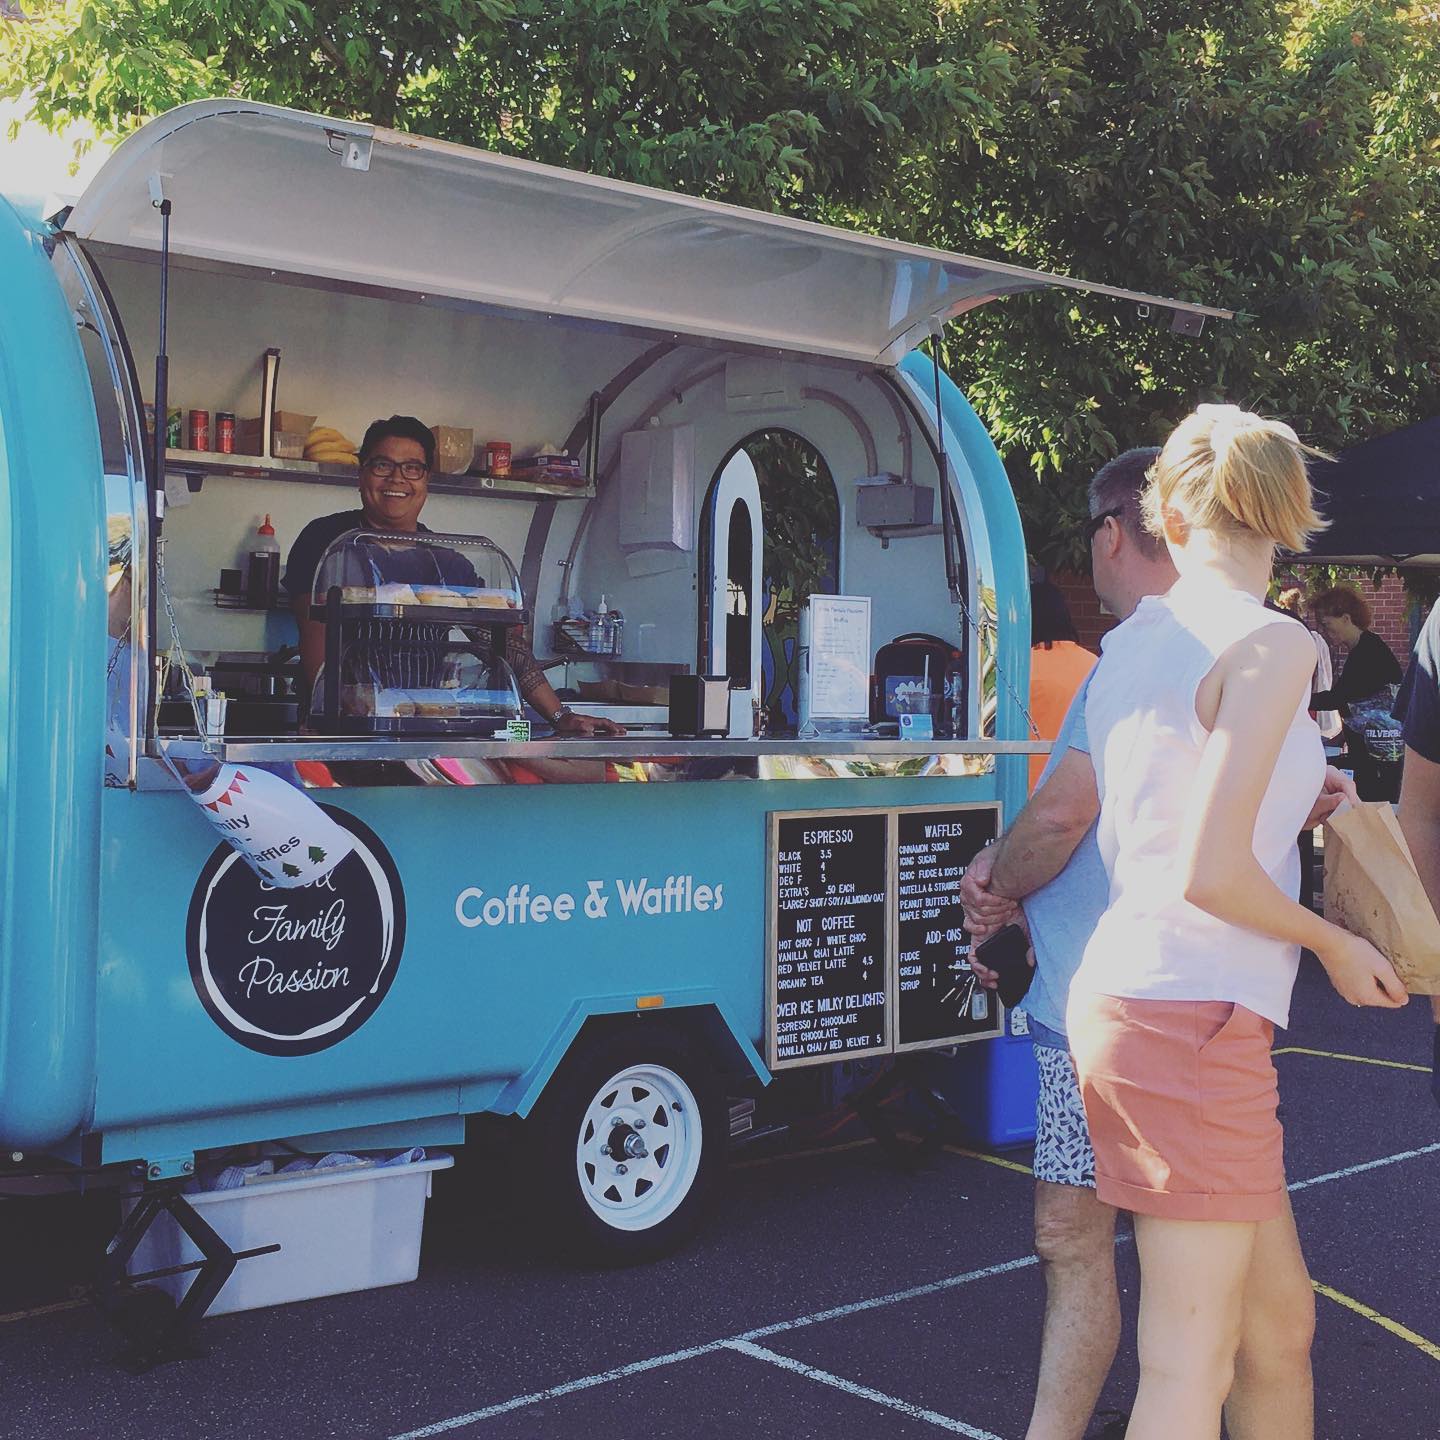 Joseph Rocillo on their mobile cafe' Food Family Passion in Pascoe Vale, Victoria